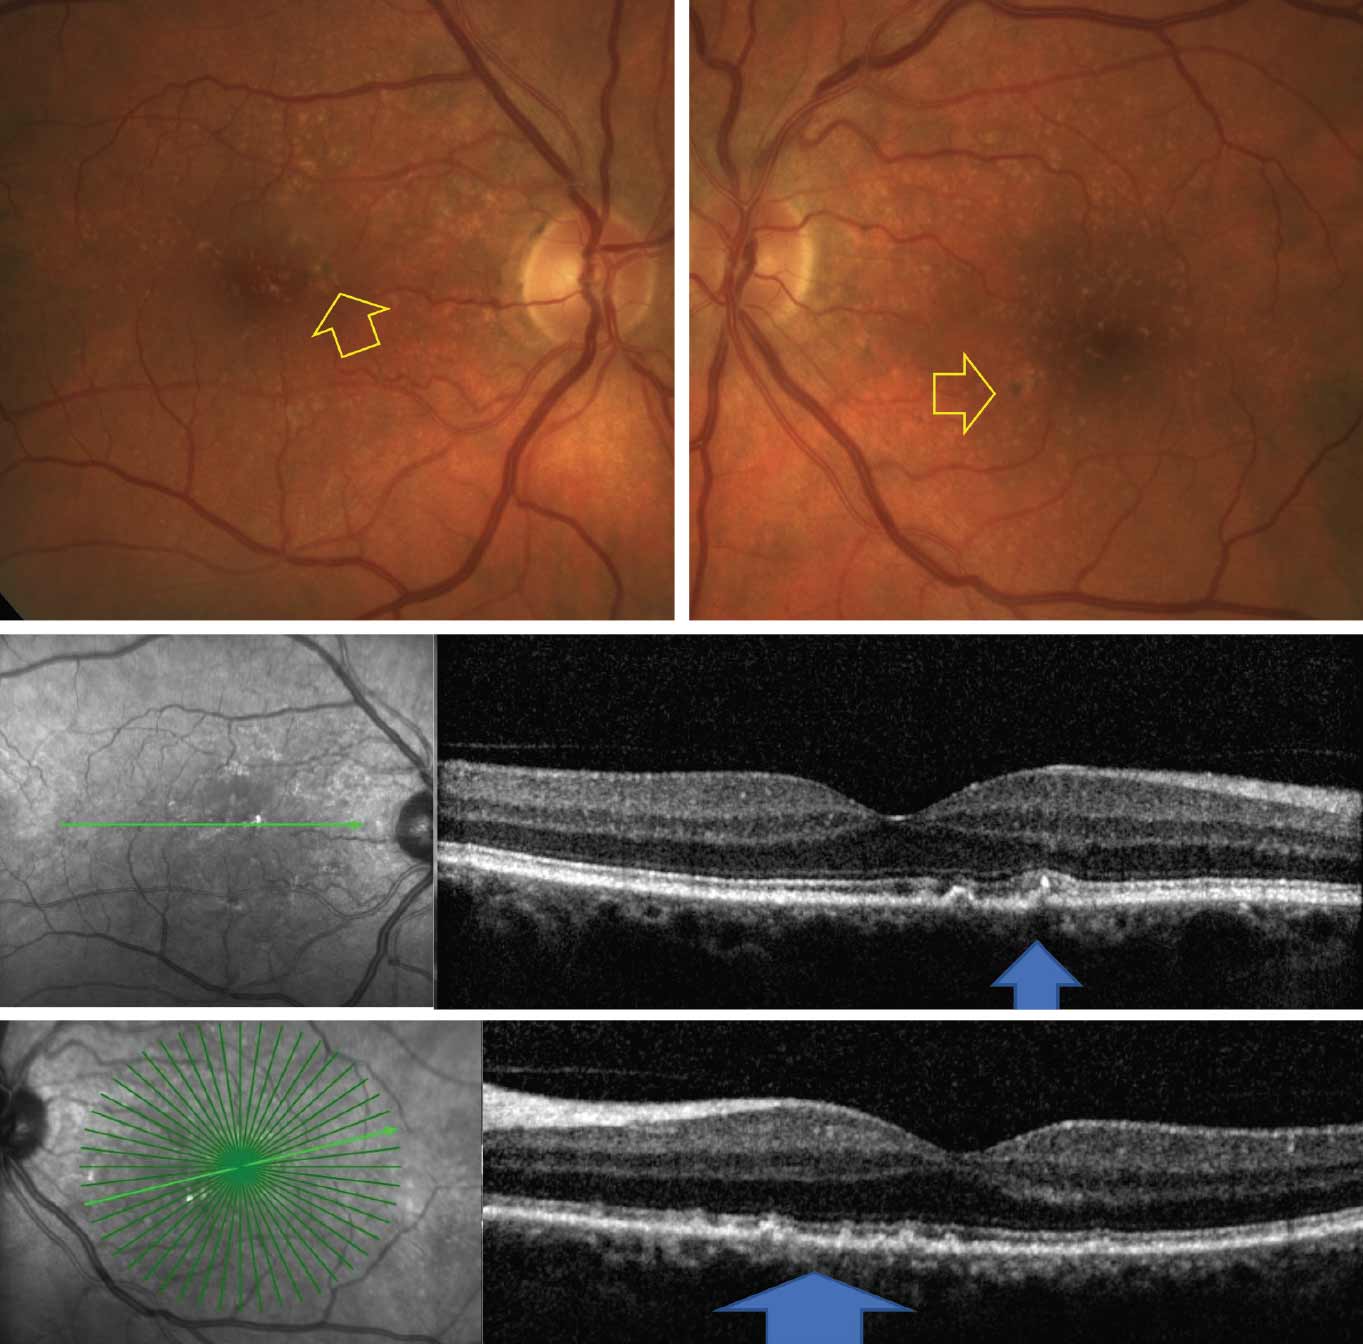 Fig. 6. Fundus photos (top) show multiple drusen and pigmentary abnormalities (yellow arrow). OCT (bottom) shows medium and large size drusen (blue arrows). 